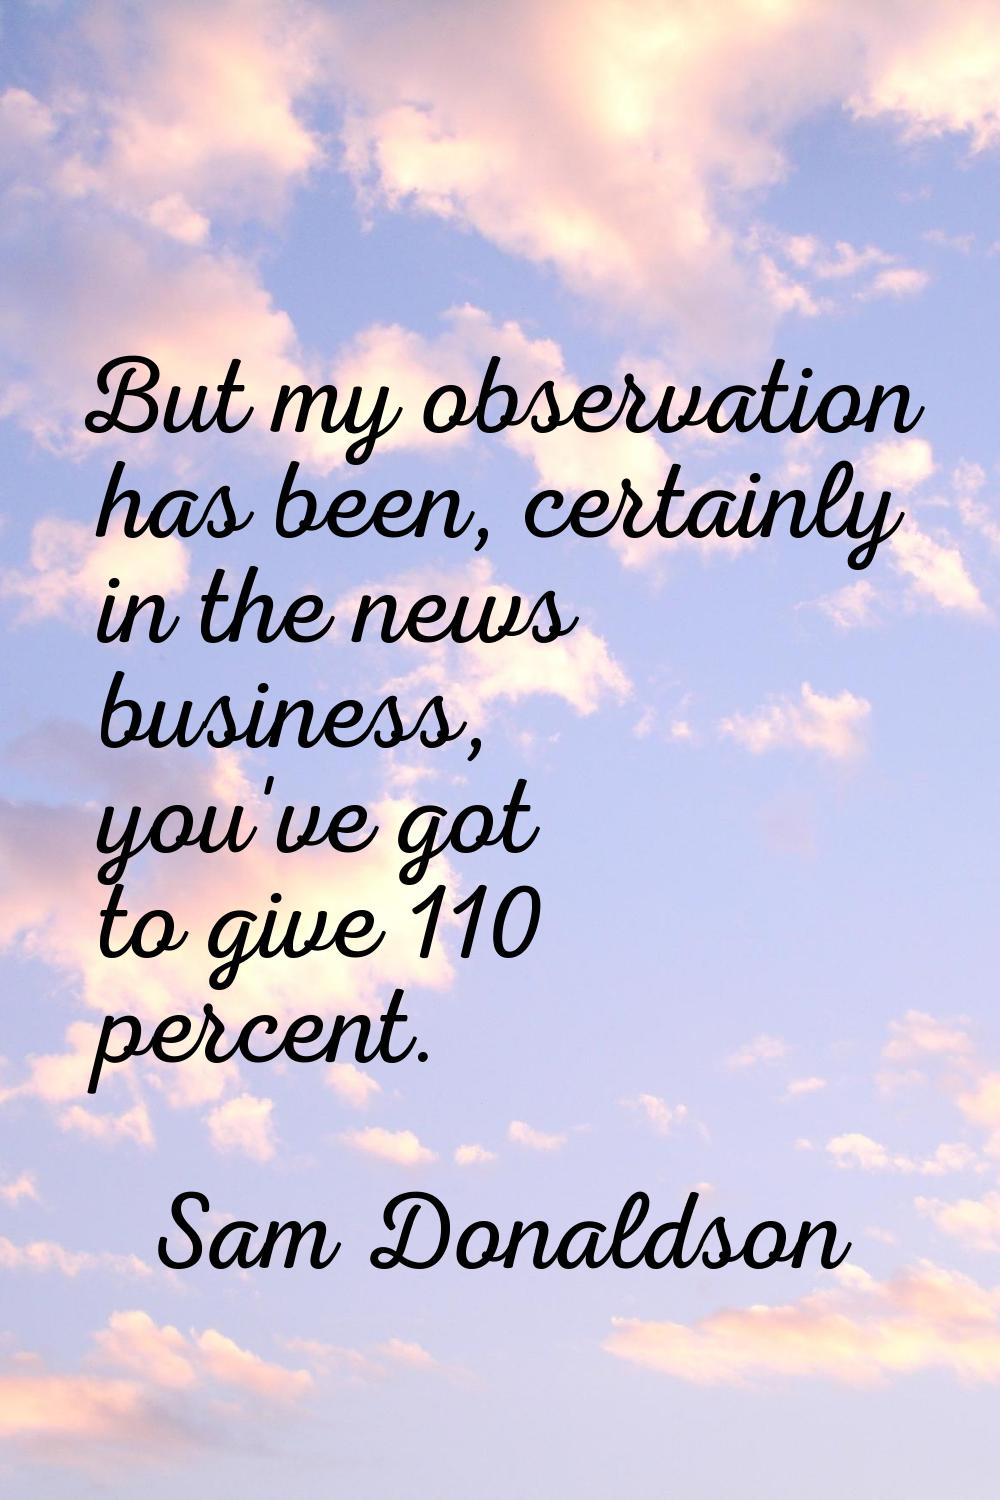 But my observation has been, certainly in the news business, you've got to give 110 percent.